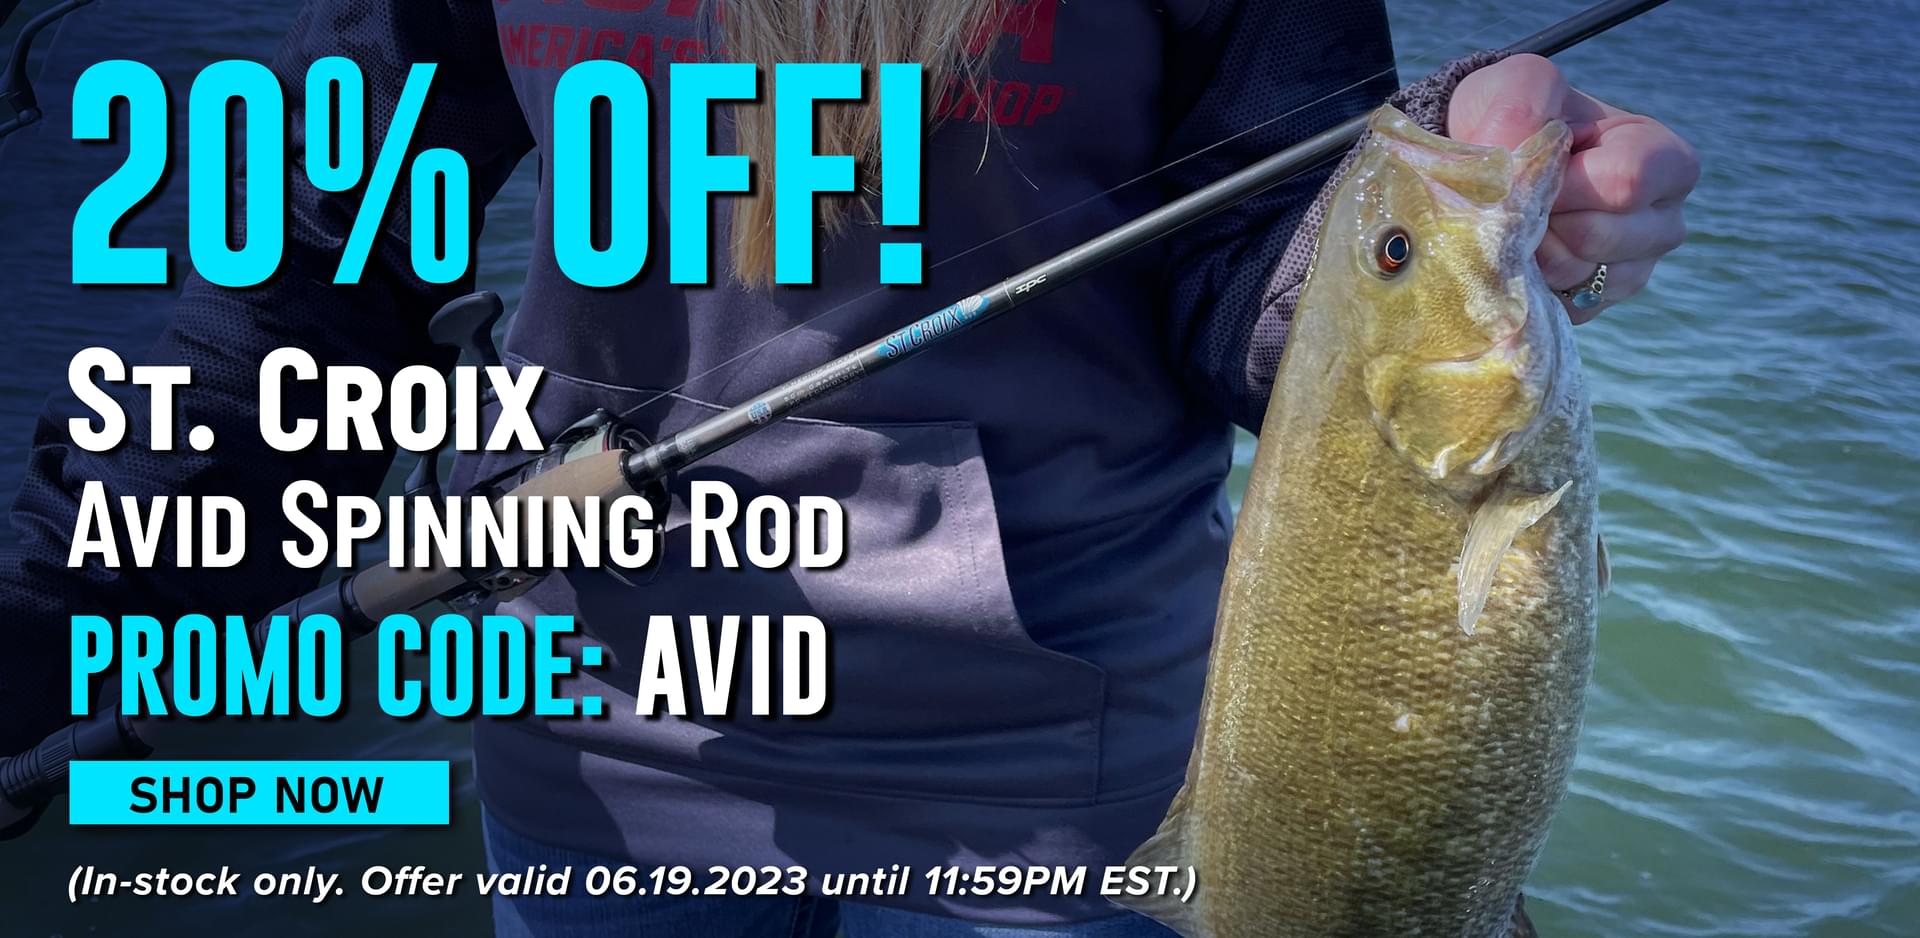 Take 20% Off The St. Croix Avid Spinning Rod, Today Only! - Fish USA